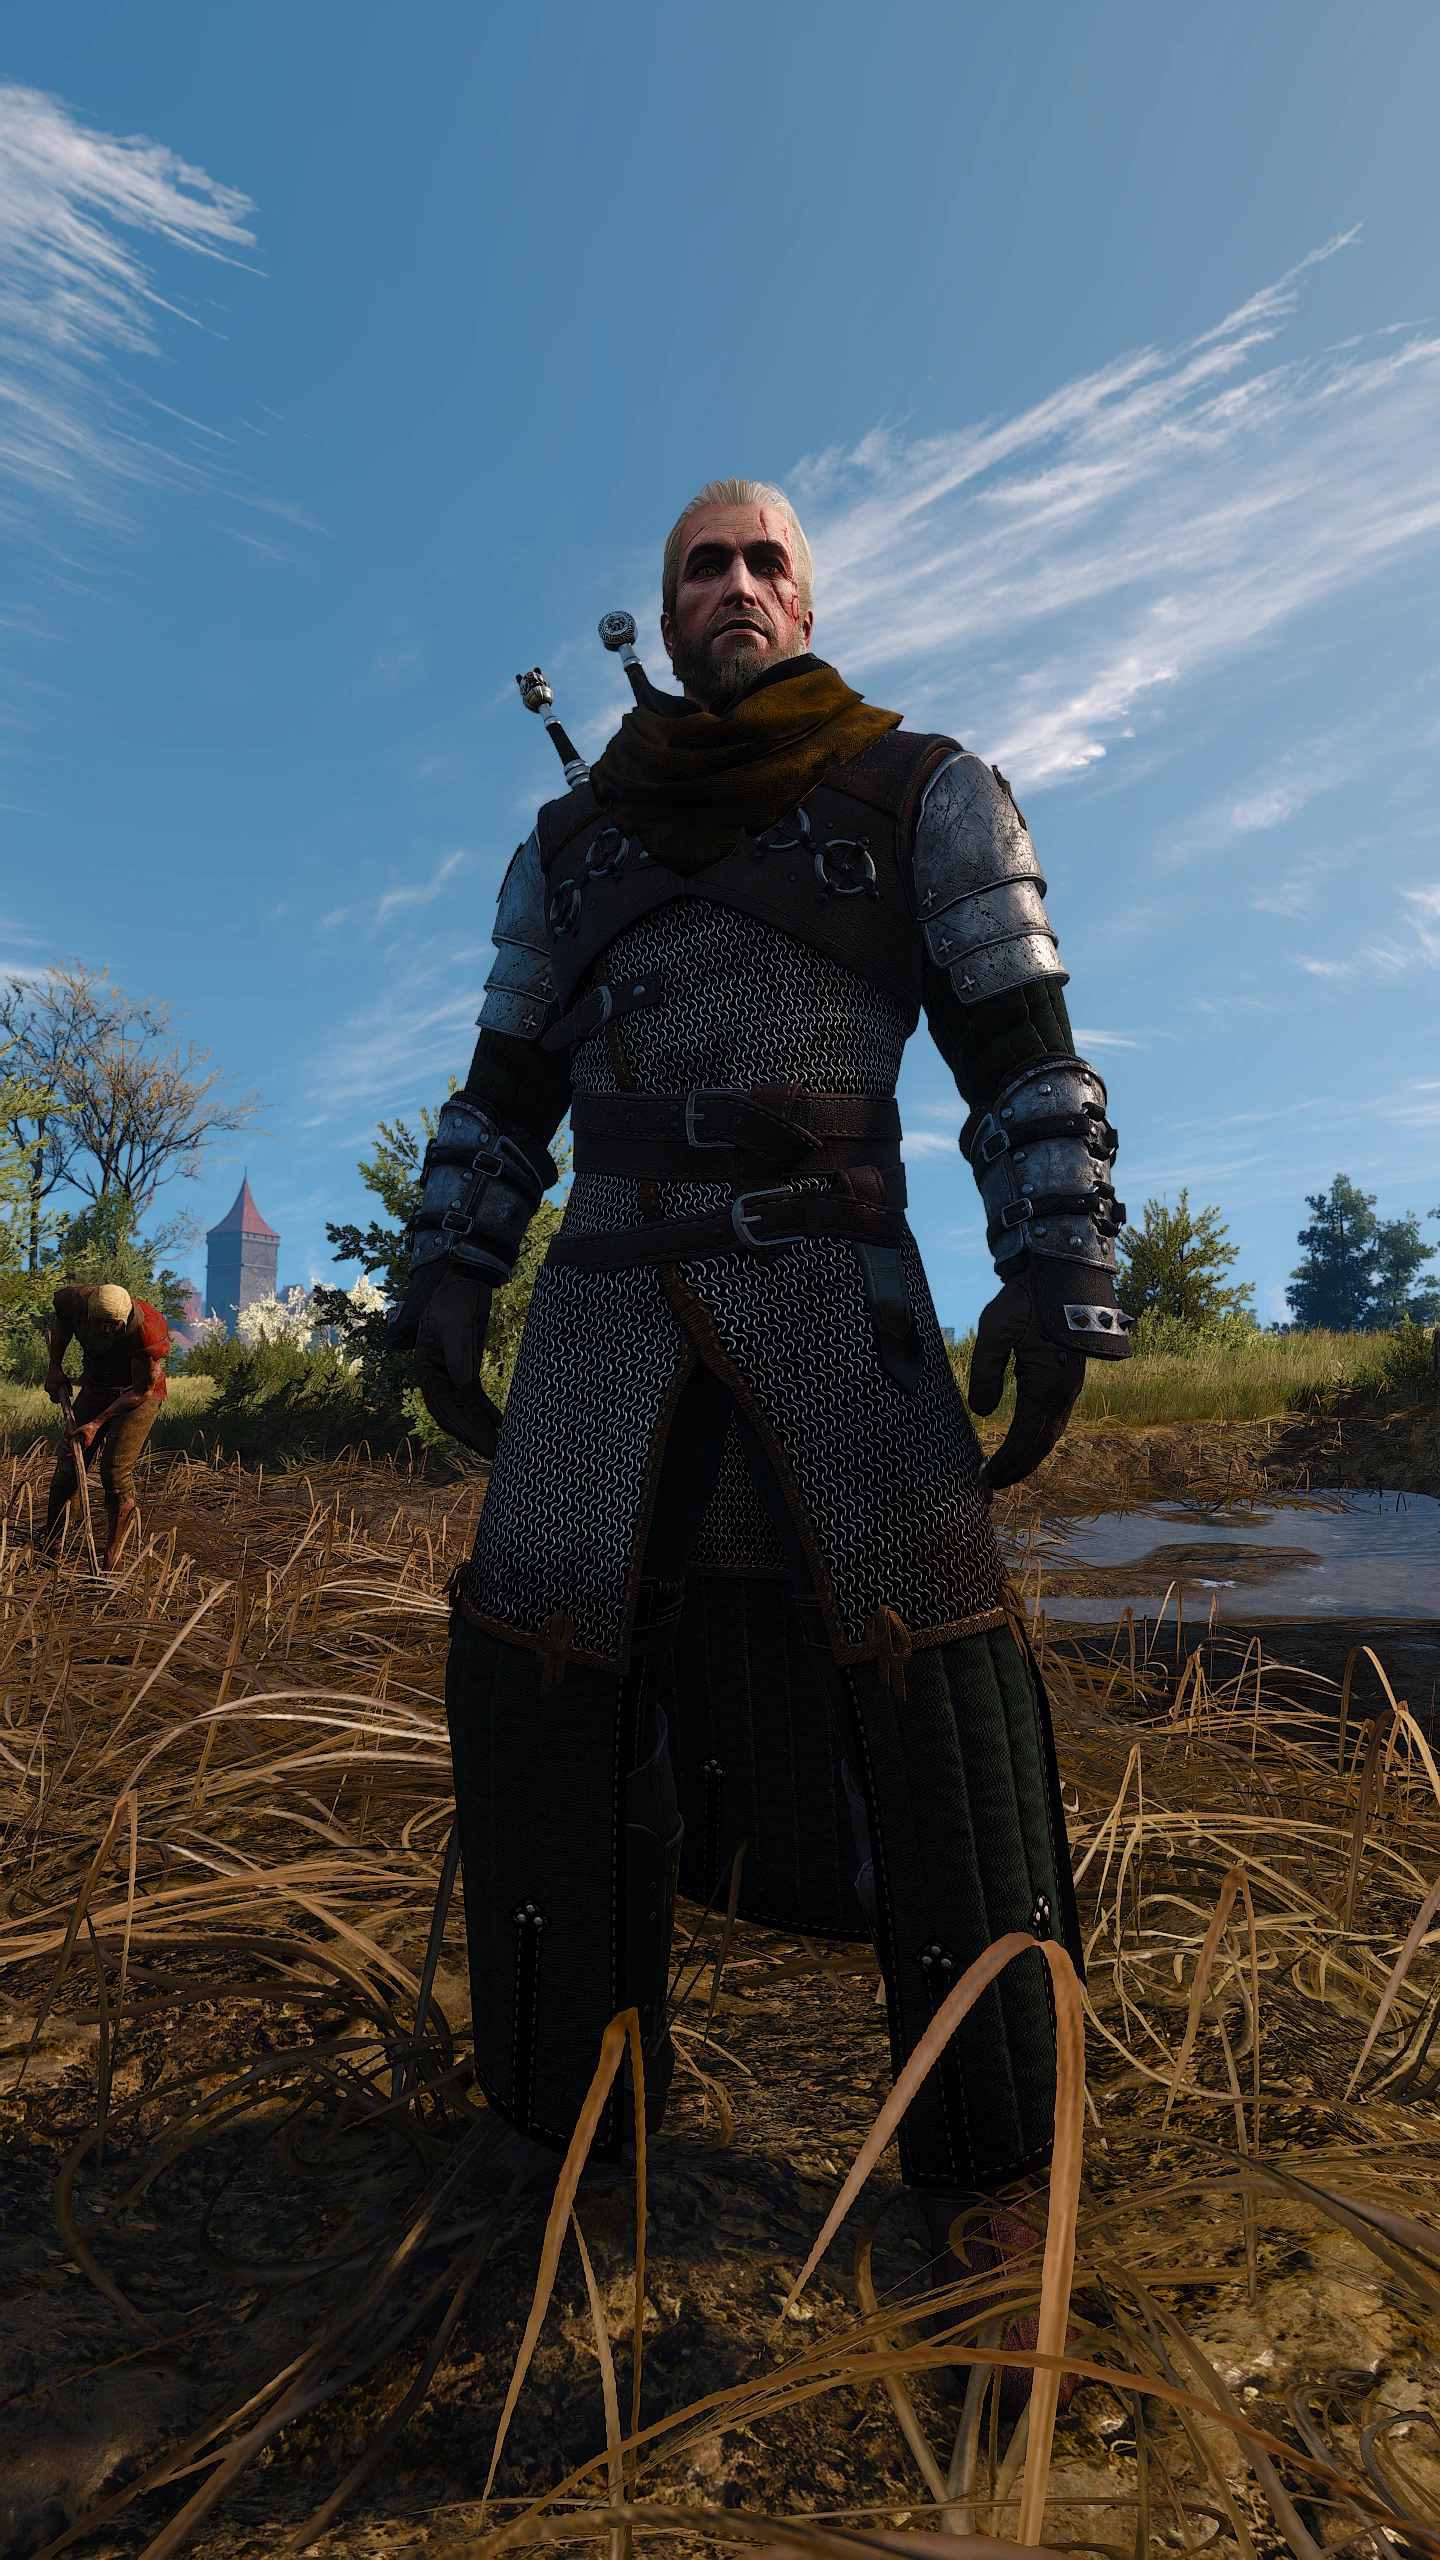 The Witcher 3's' Next-Gen Update Brings More Than Just Prettier Graphics